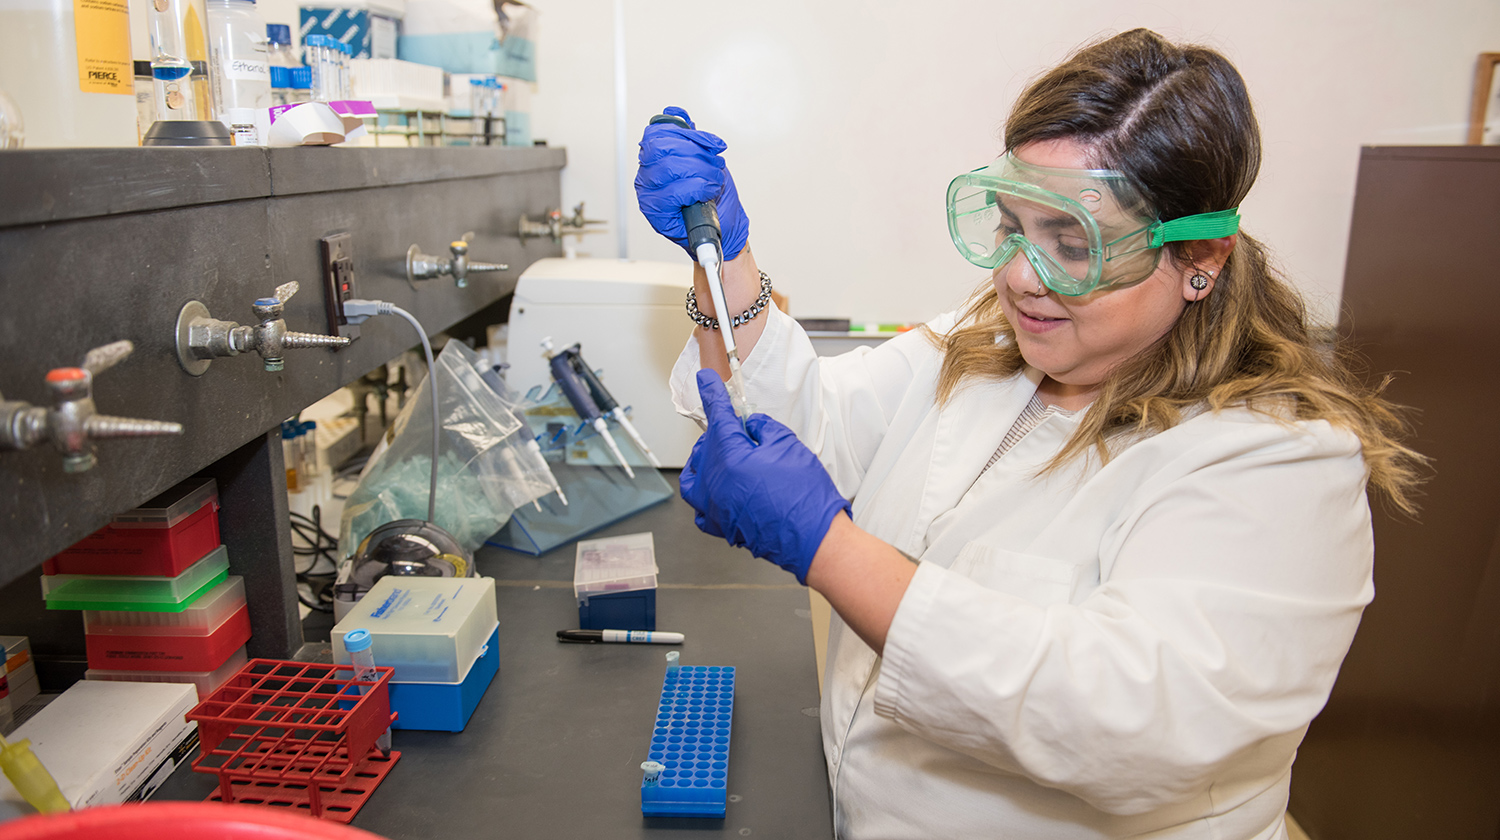 Maria Nava, a cell and molecular biology at CSUDH, participated in the Summer Research Opportunity Program at Purdue University and assisted in research on castration resistant prostate cancer.